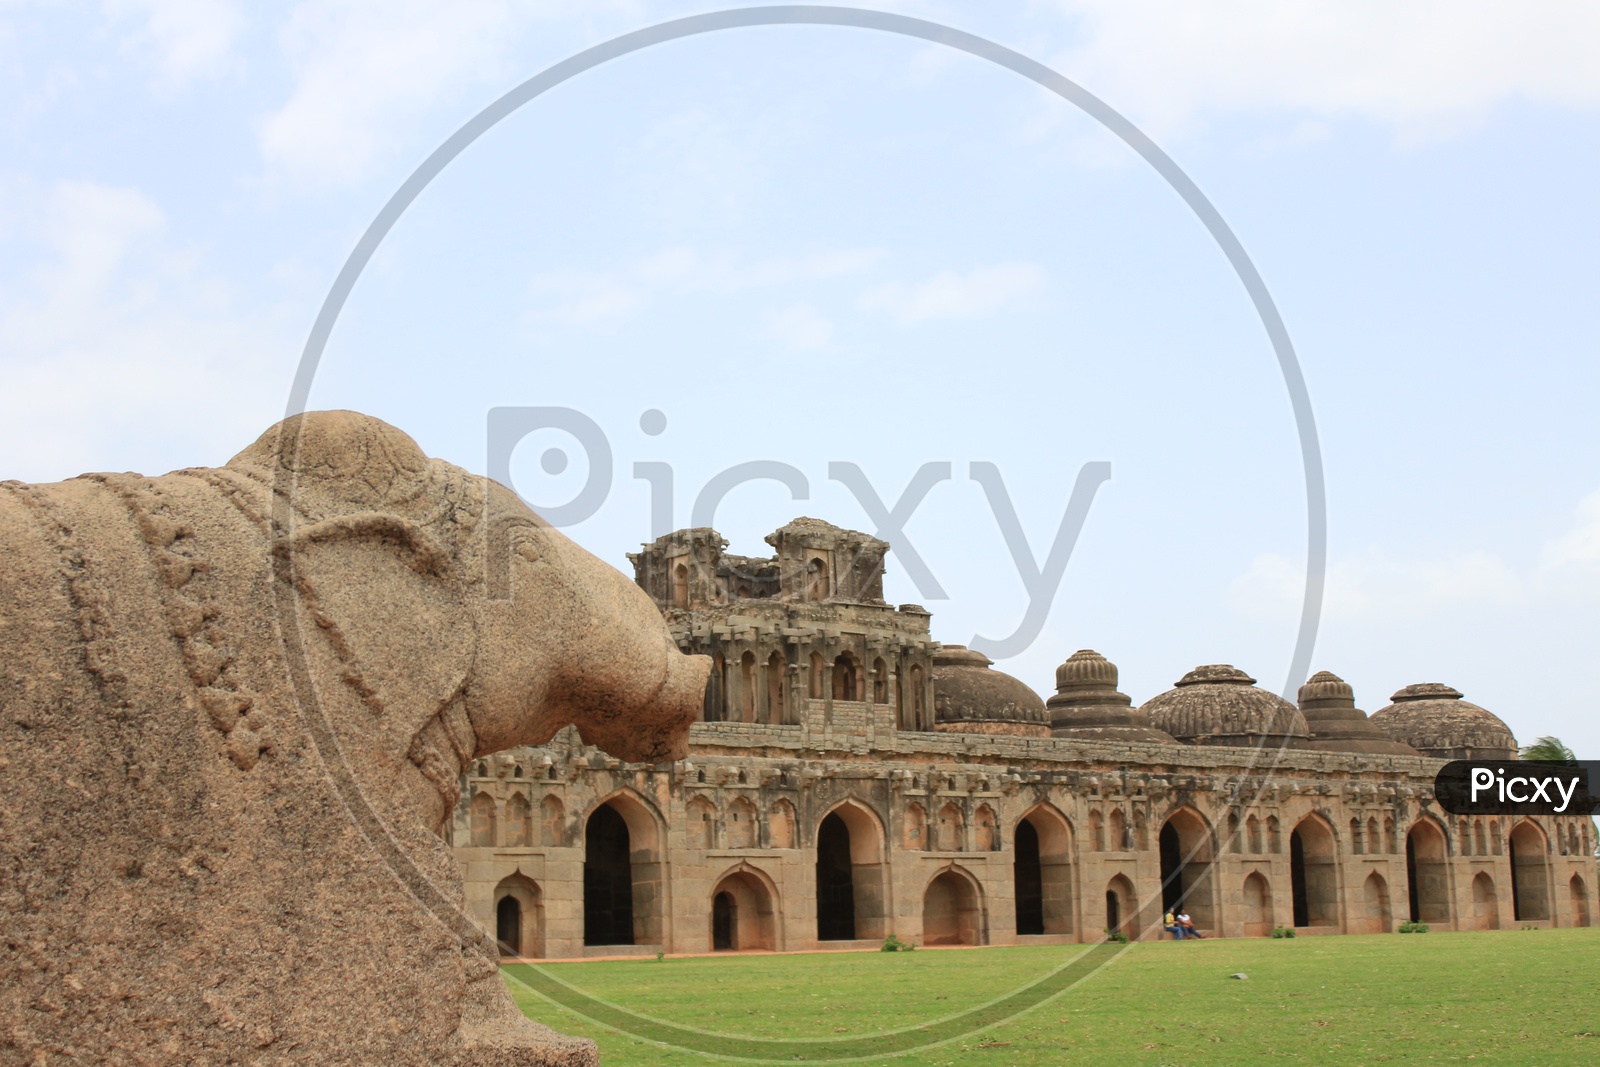 Temples in Hampi with Garden / Historical Construction